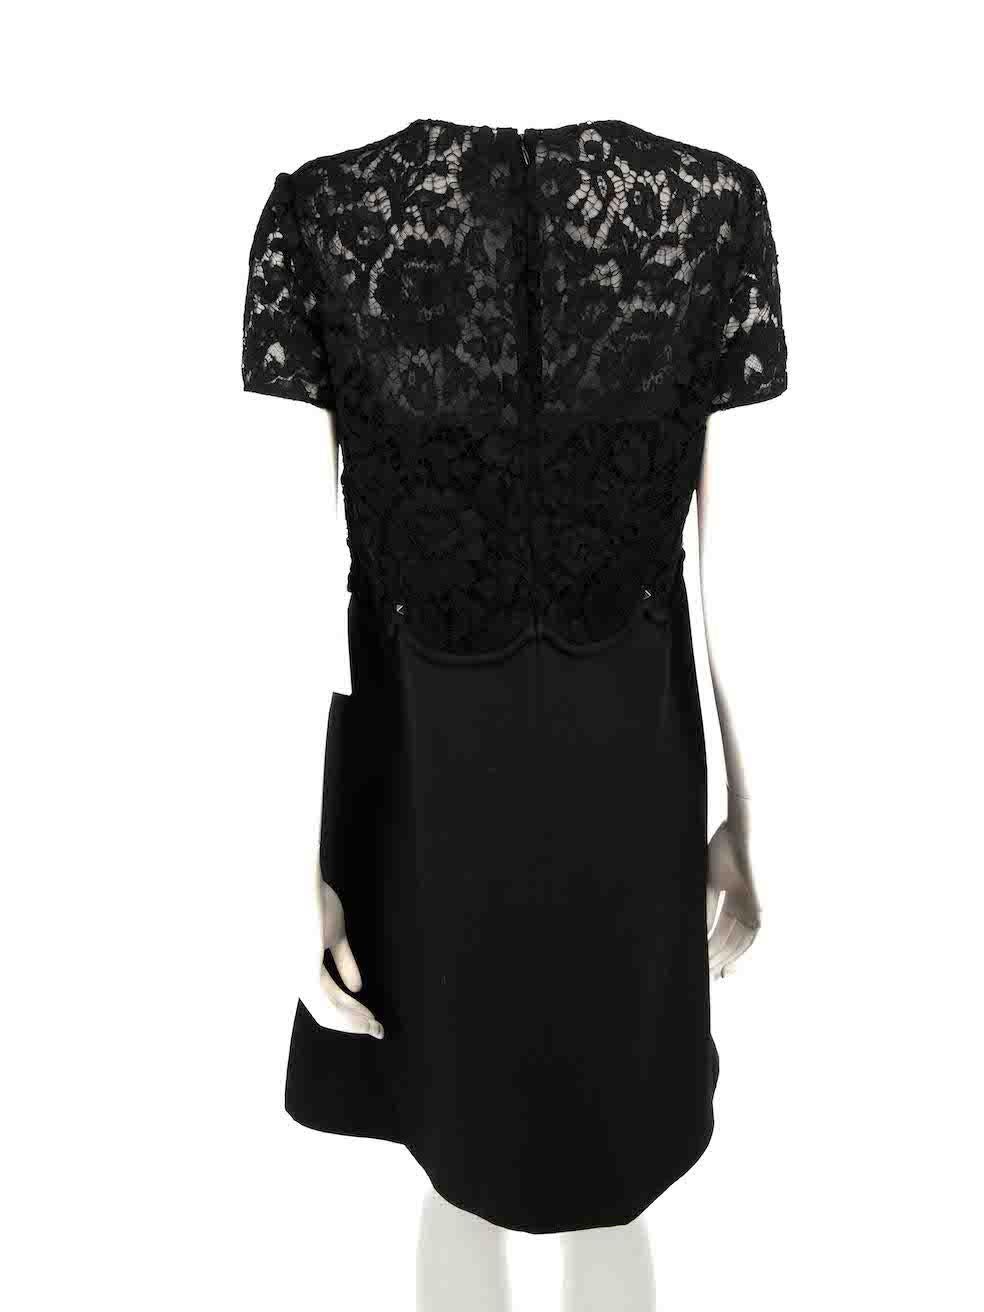 Valentino Black Wool Rockstud Lace Top Dress Size XL In New Condition For Sale In London, GB